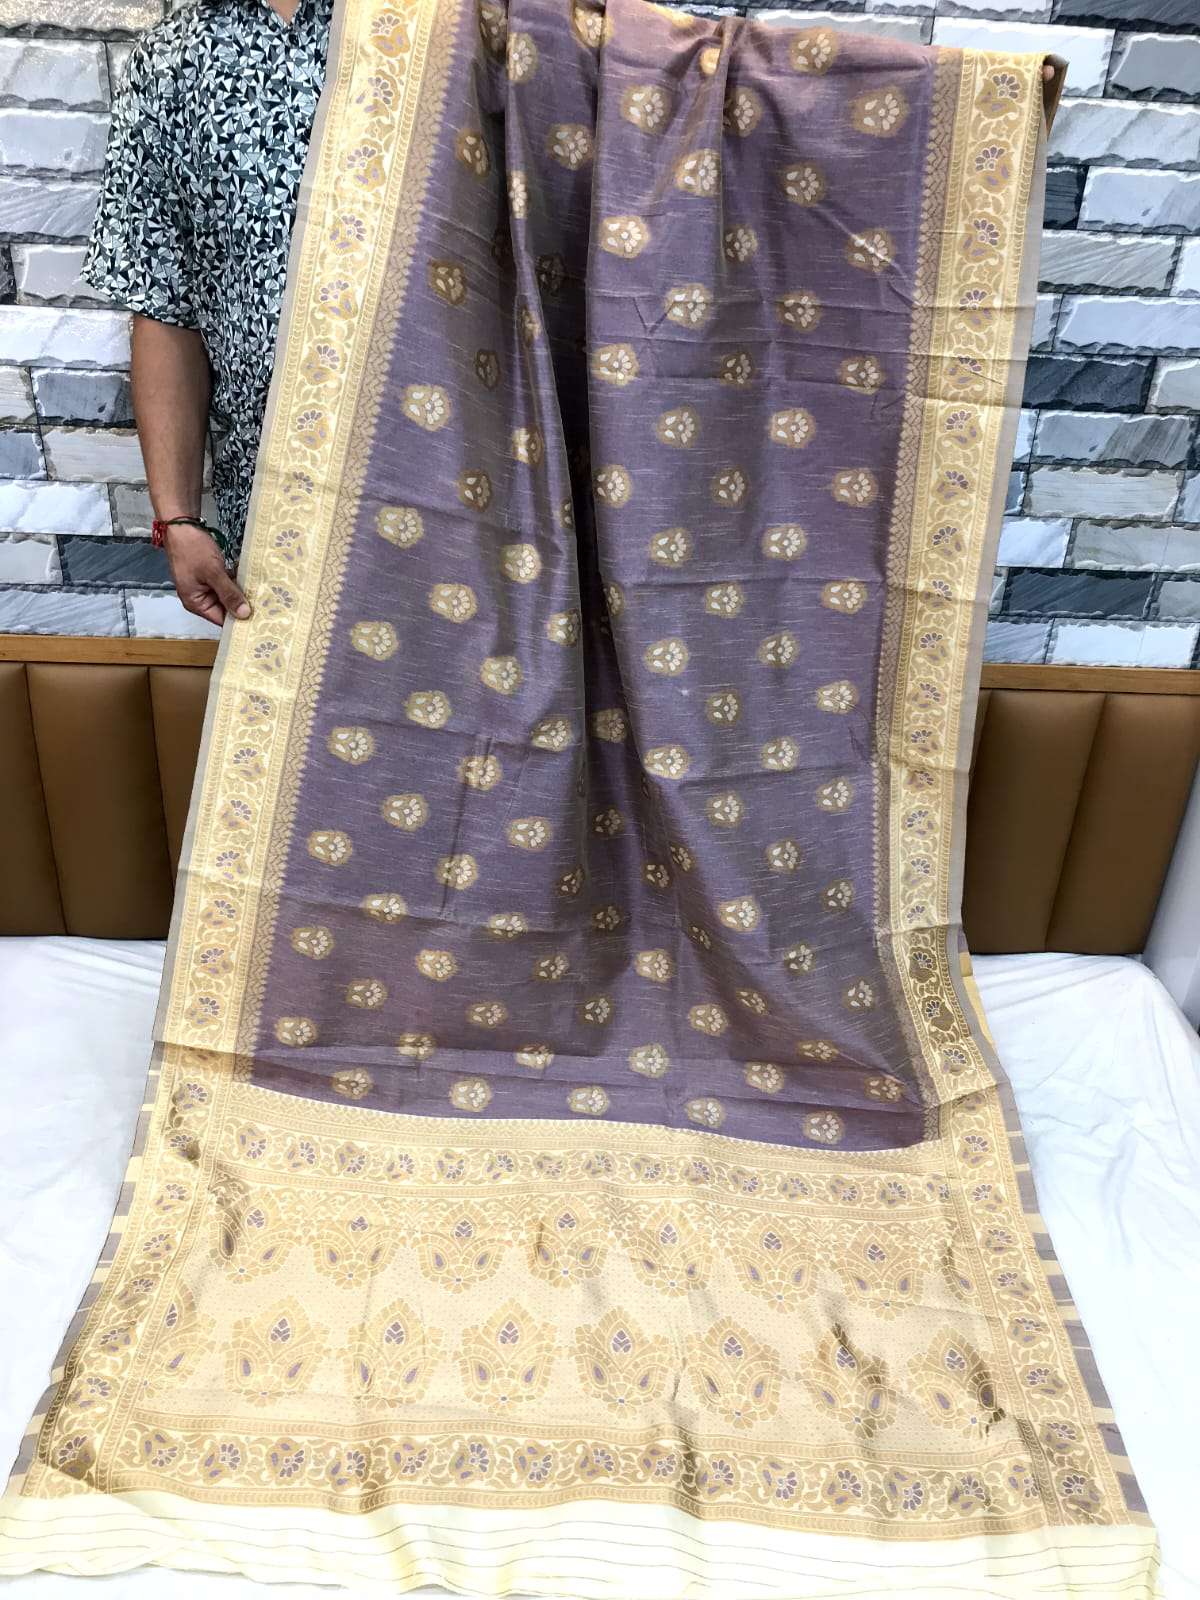 ITALY BY ASLIWHOLESALE DESIGNER SOFT MALAI COTTON PRINTED SAREES